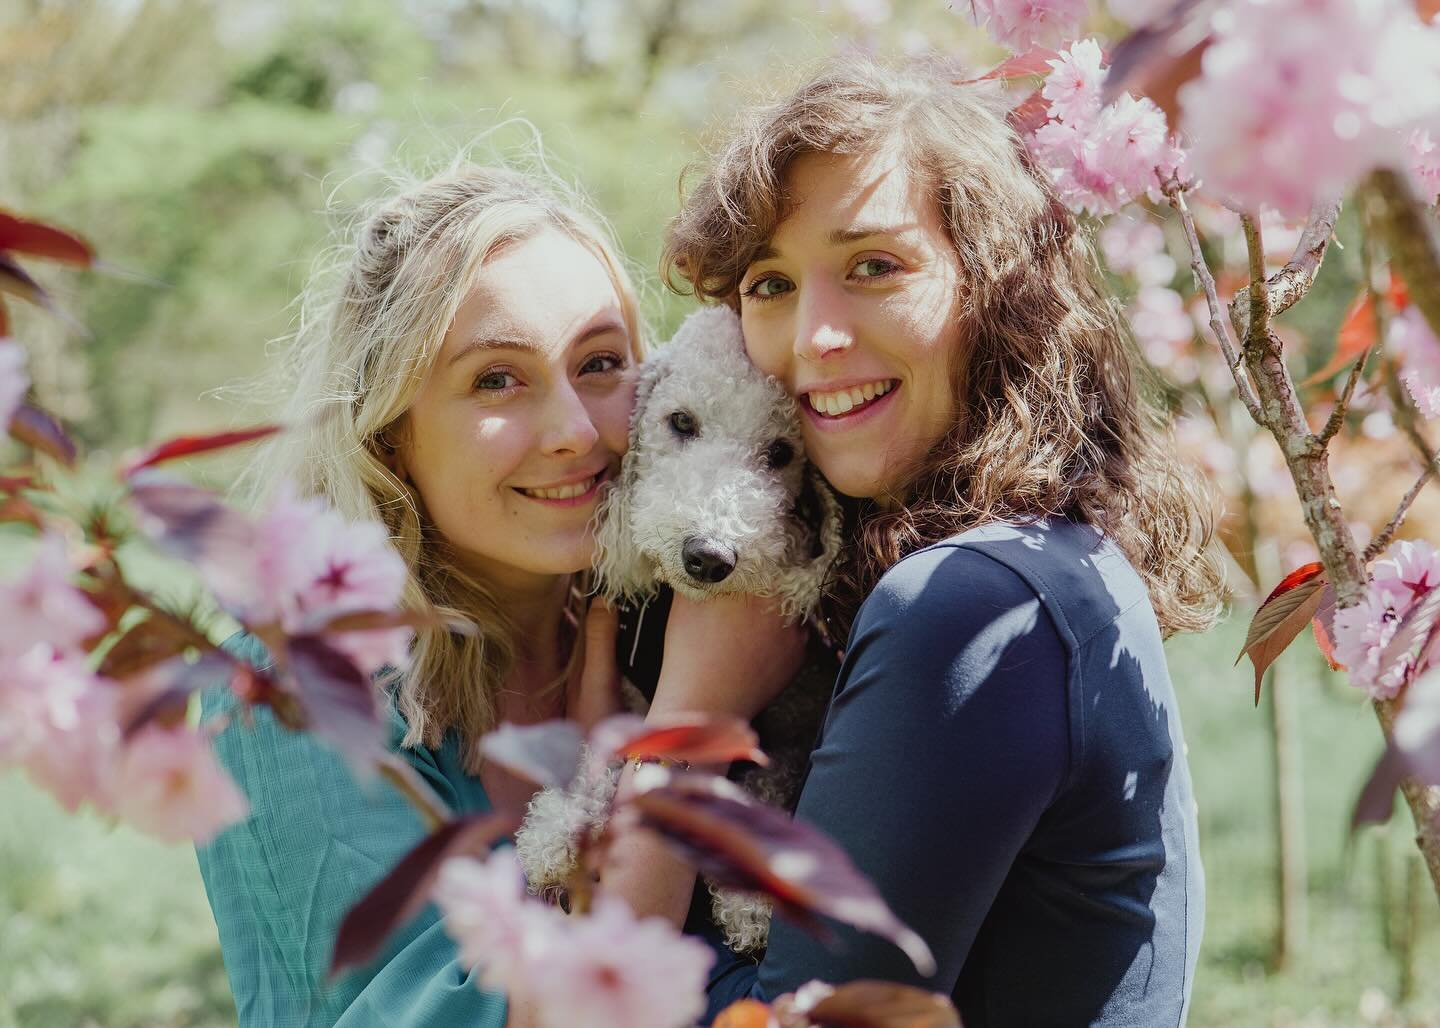 Poppy &amp; Georgie&rsquo;s engagement shoot, featuring Nelly🐶🌸🌿

We can&rsquo;t wait to capture their wedding this July 🌞

#engagement #engagementshoot #engagementphotography #wedding #weddingphotography #weddingphotographer #love #couple #weddi